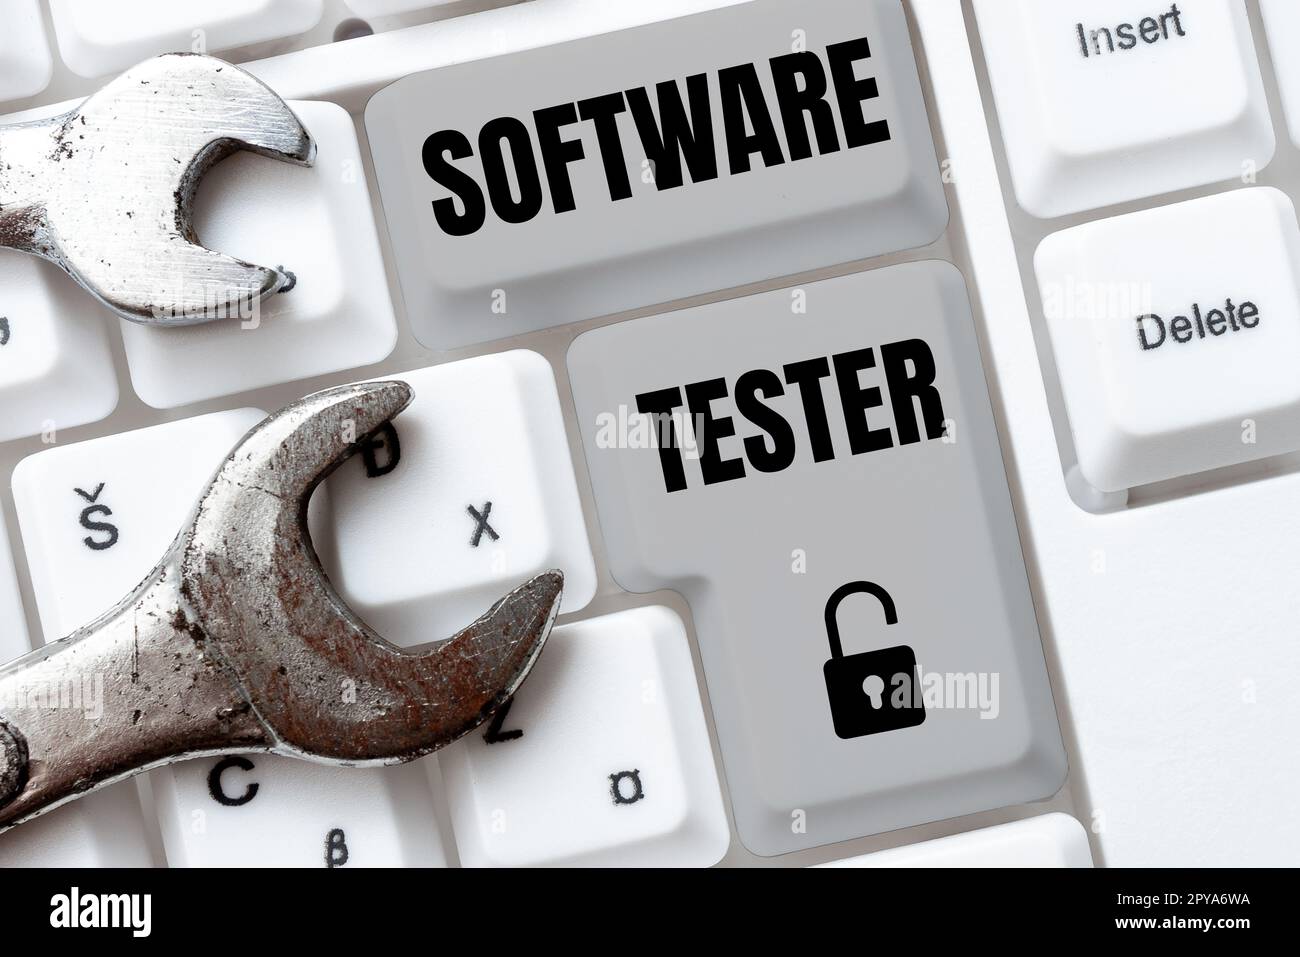 Sign displaying Software Tester. Business concept implemented to protect software against malicious attack Stock Photo